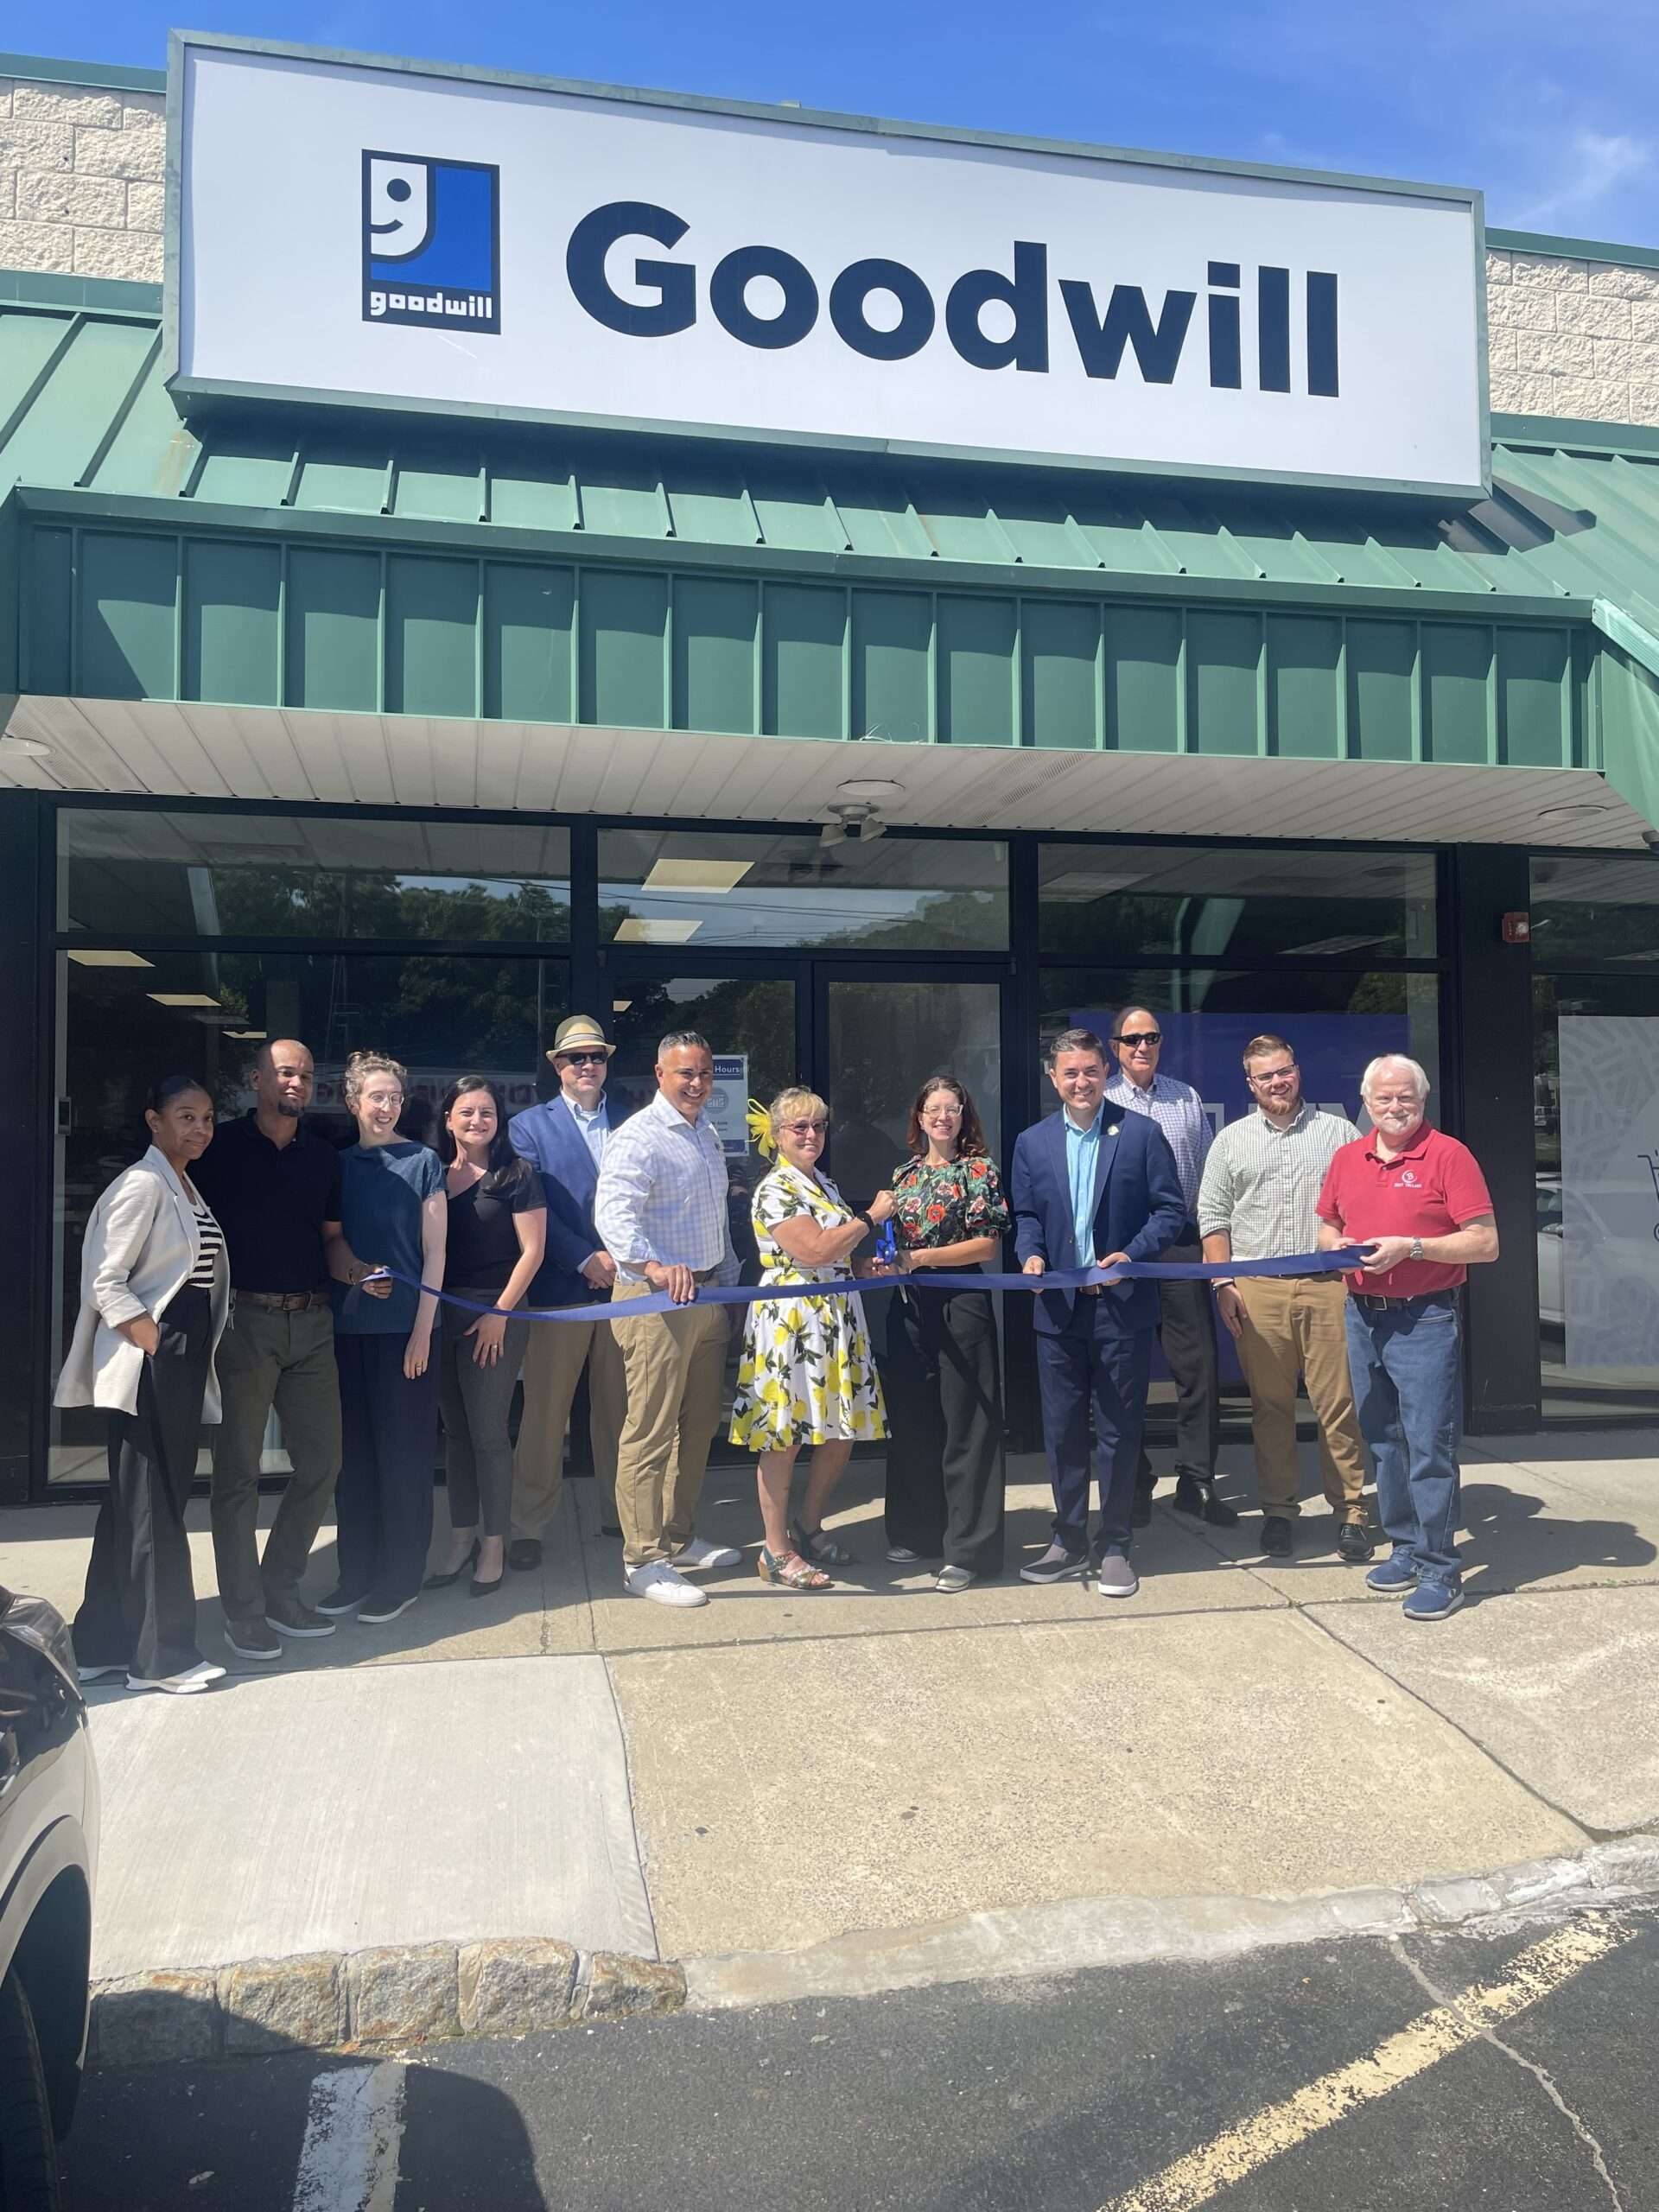 A group of people standing in front of a Goodwill store during a ribbon-cutting ceremony. The group, consisting of both men and women dressed in business casual attire, is holding a blue ribbon. The Goodwill sign is prominently displayed above the entrance. The event appears to be taking place on a sunny day, and the store has a green awning over the entrance.